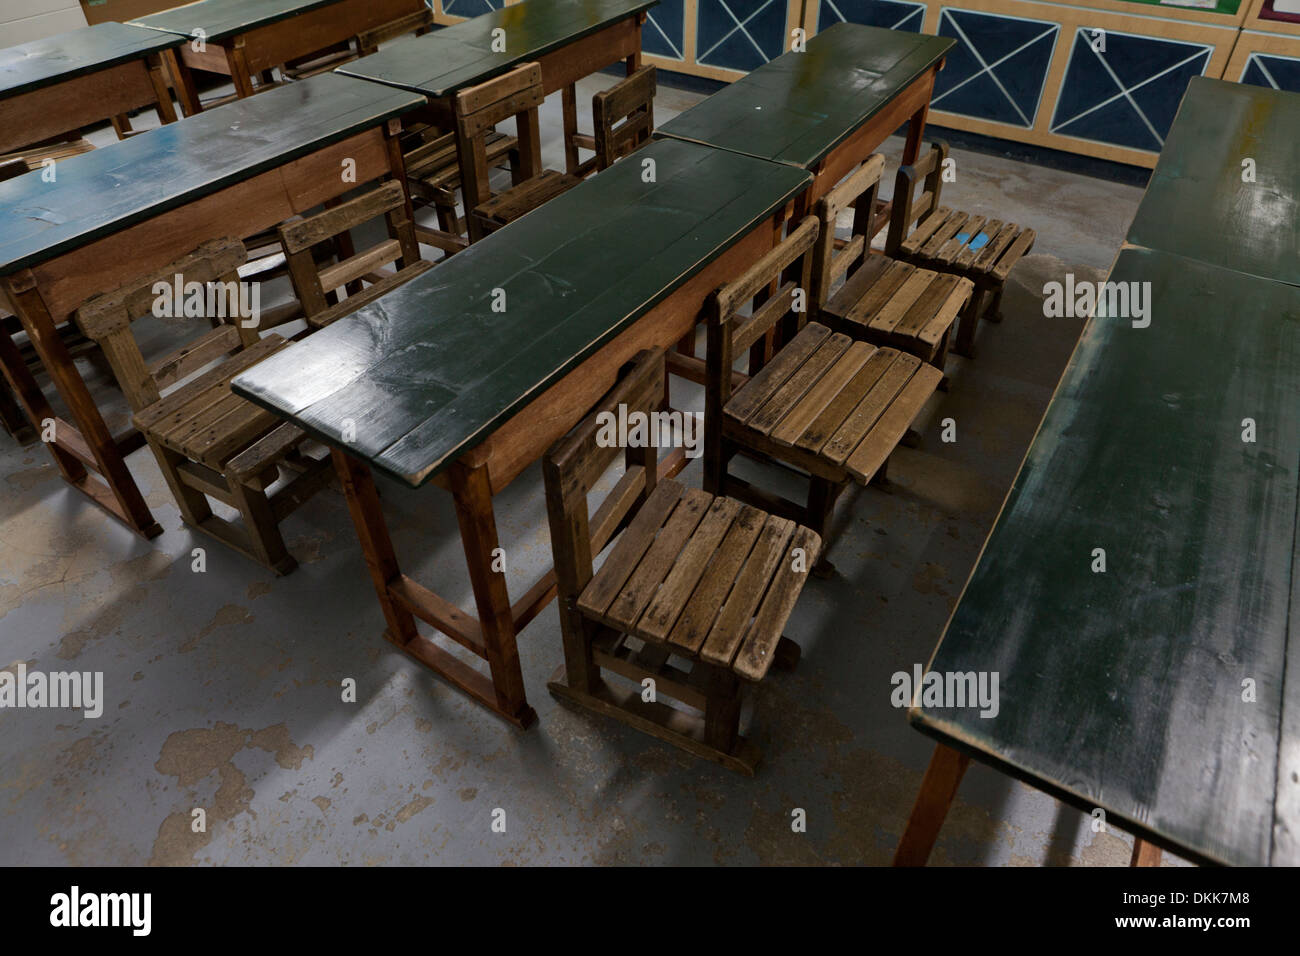 Mock-up of North Korean school classroom desks and chairs - Unification Observatory, Odusan, South Korea Stock Photo